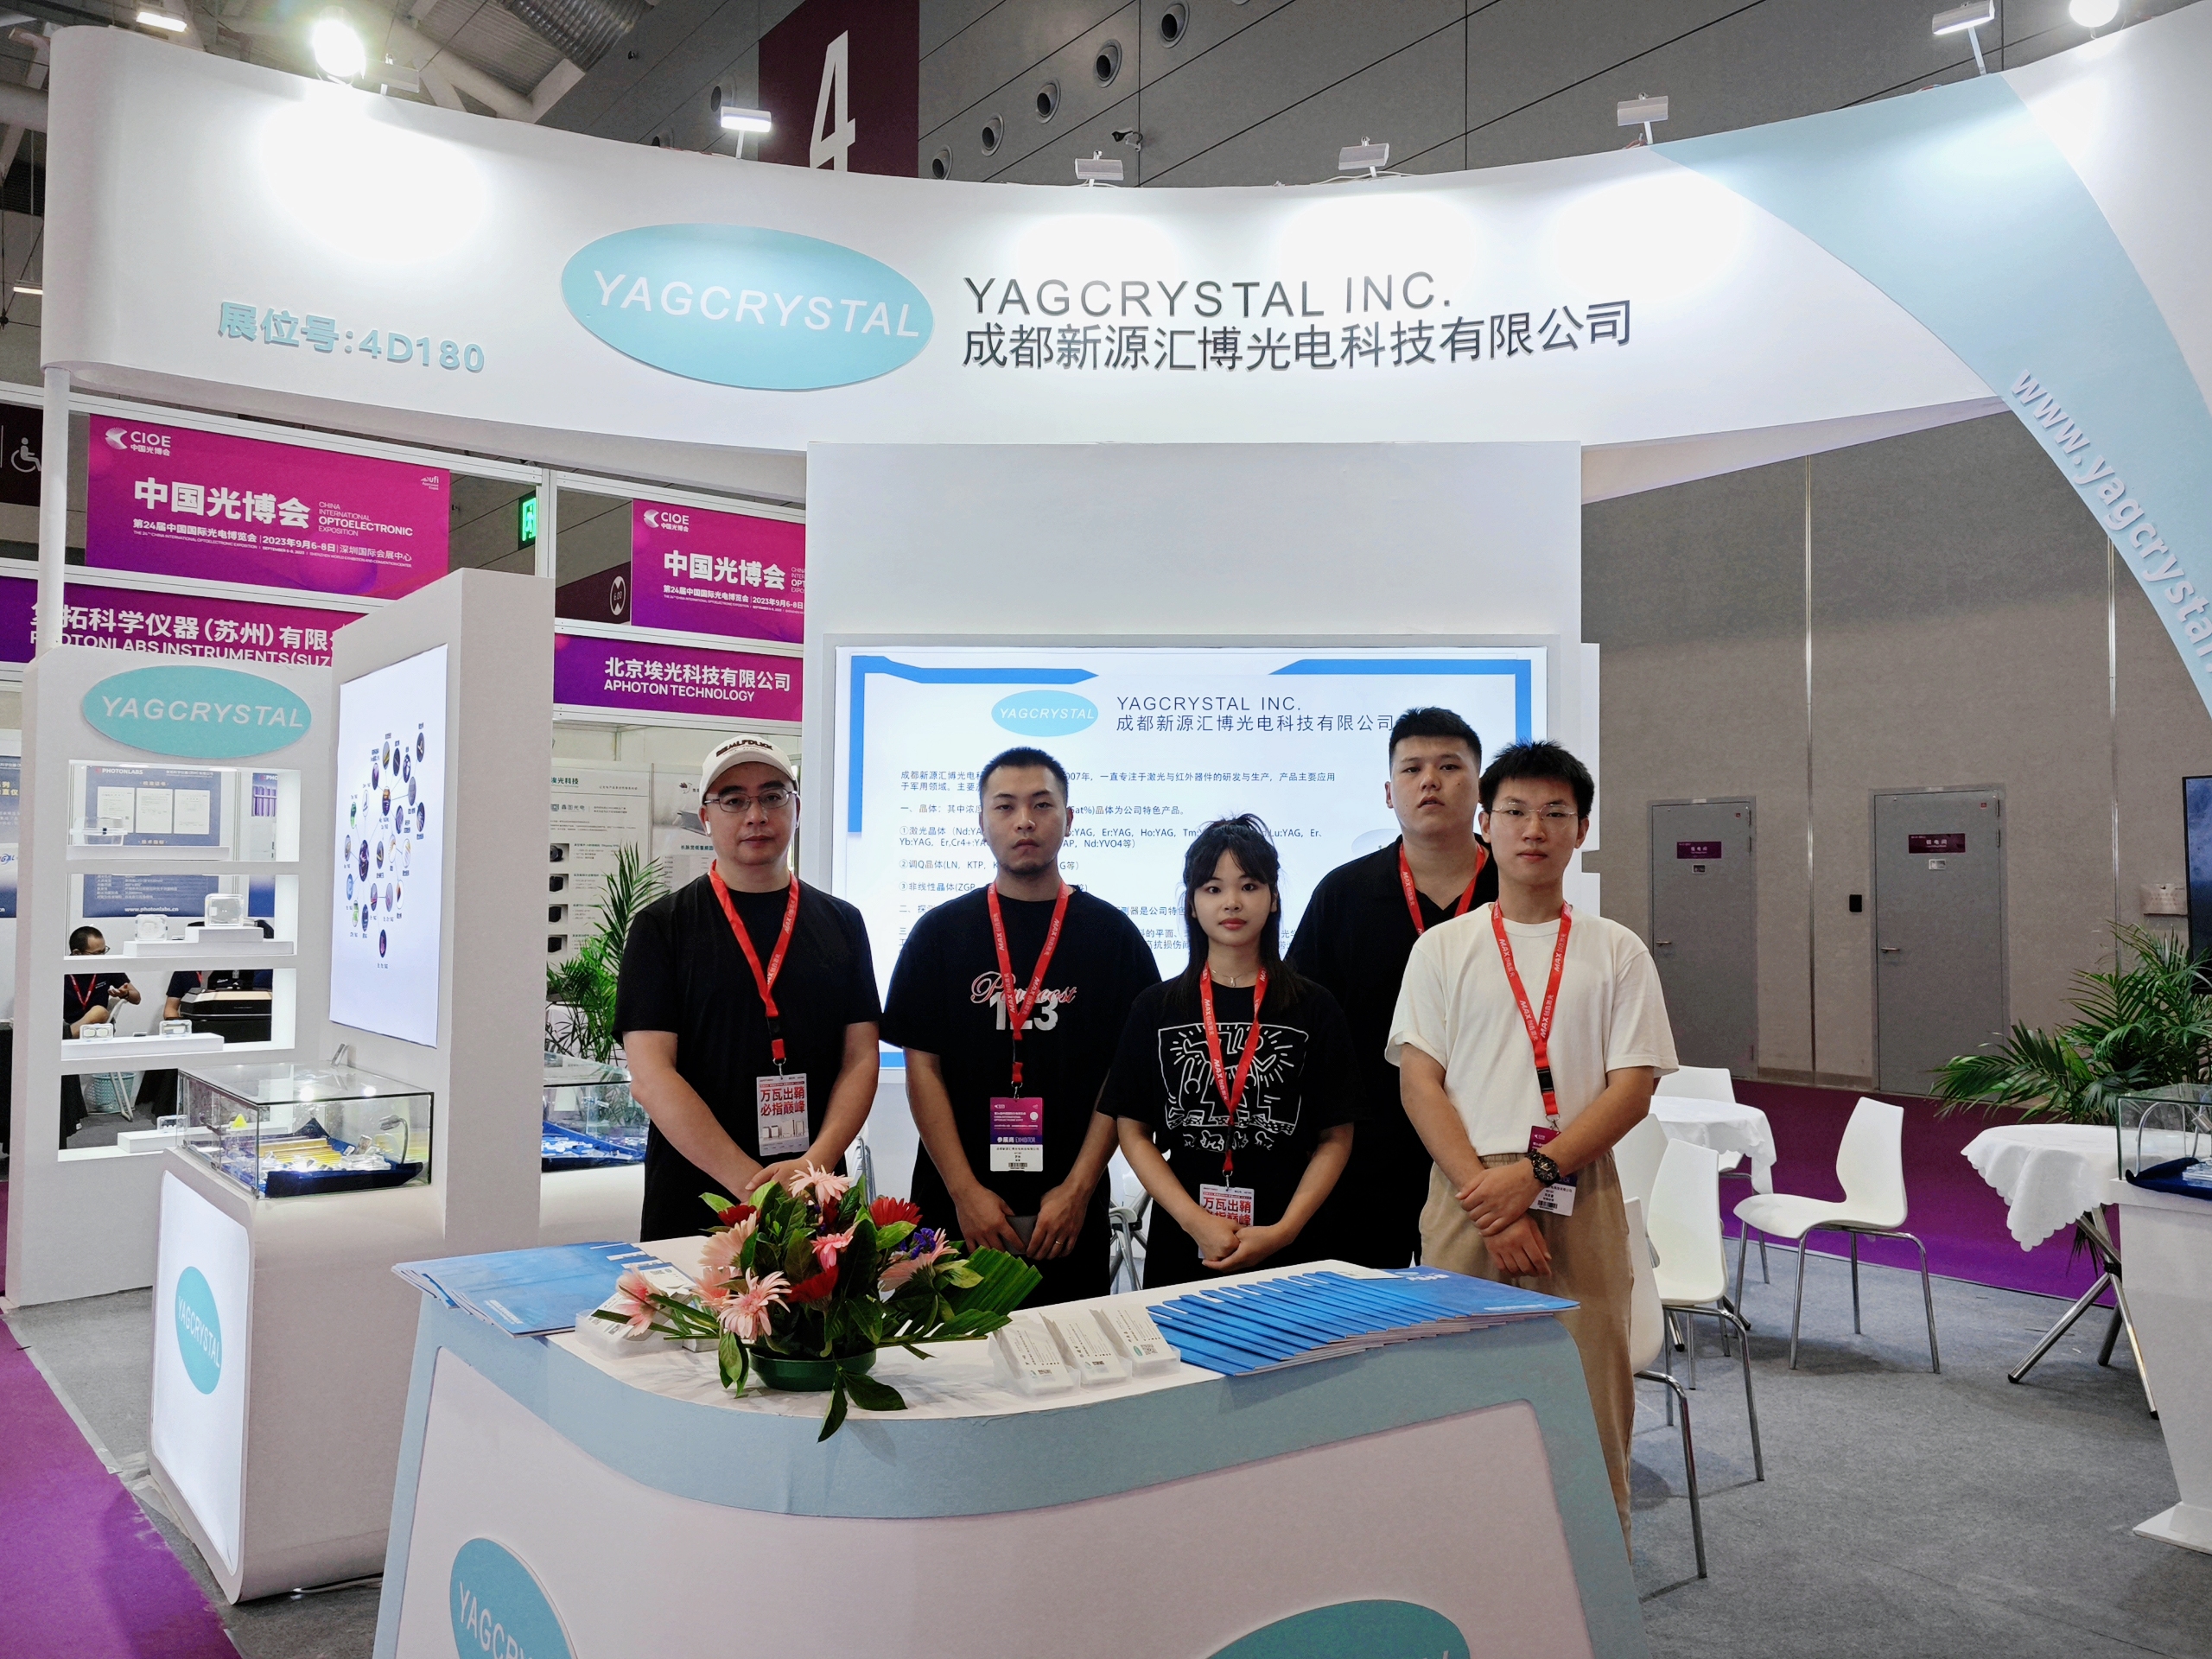 The 24th China International Optoelectronics Expo in Shenzhen